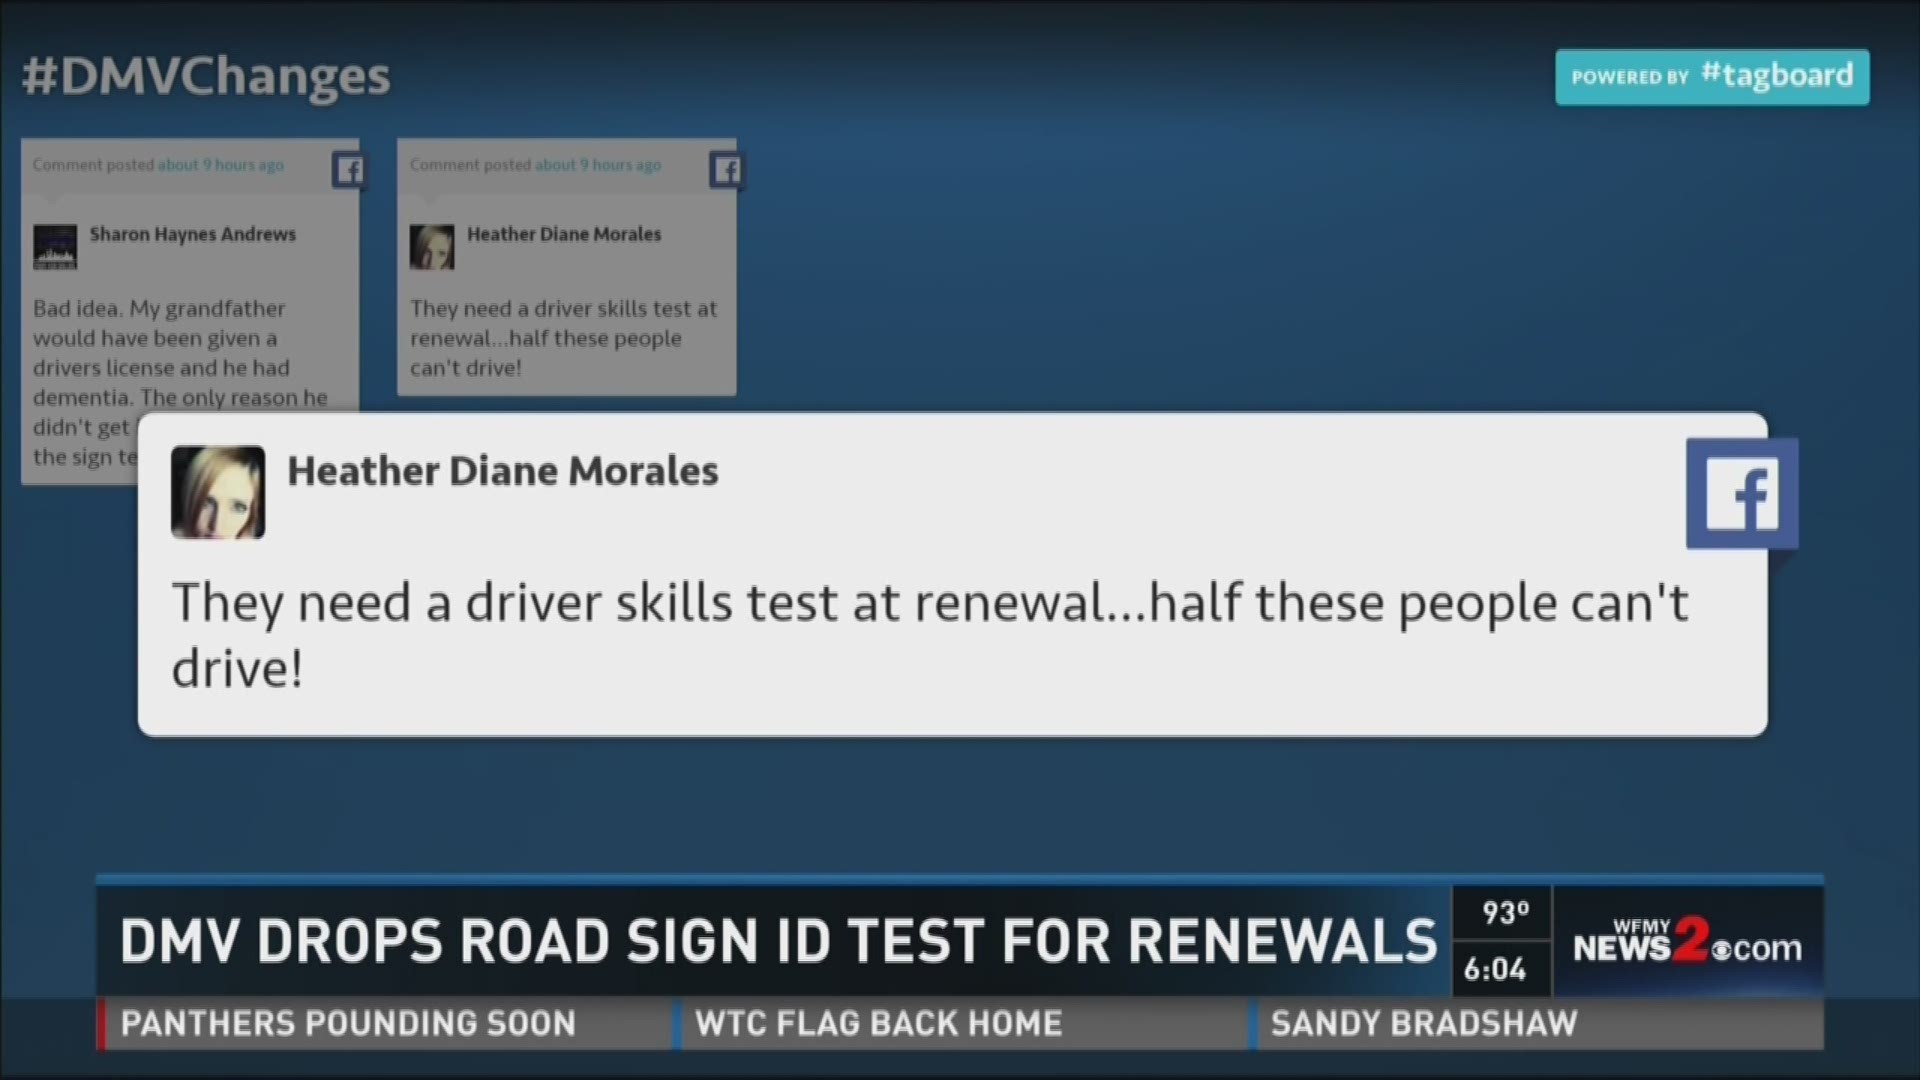 DMV Drops Road Sign Test: Is This Safe?